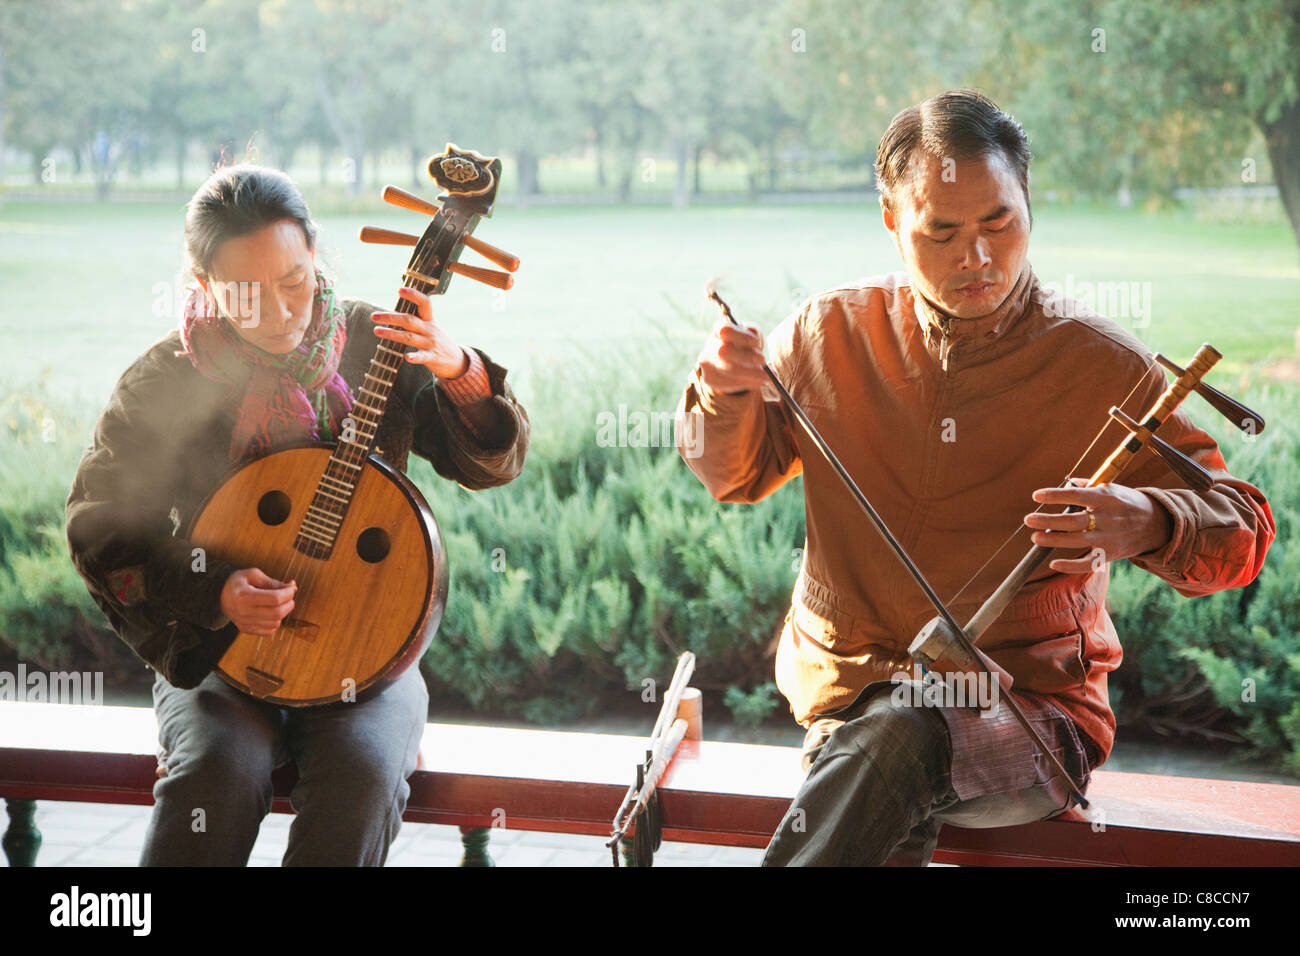 China, Beijing, Temple of Heaven Park, Man and Woman Playing Traditional Chinese Stringed Instruments Stock Photo